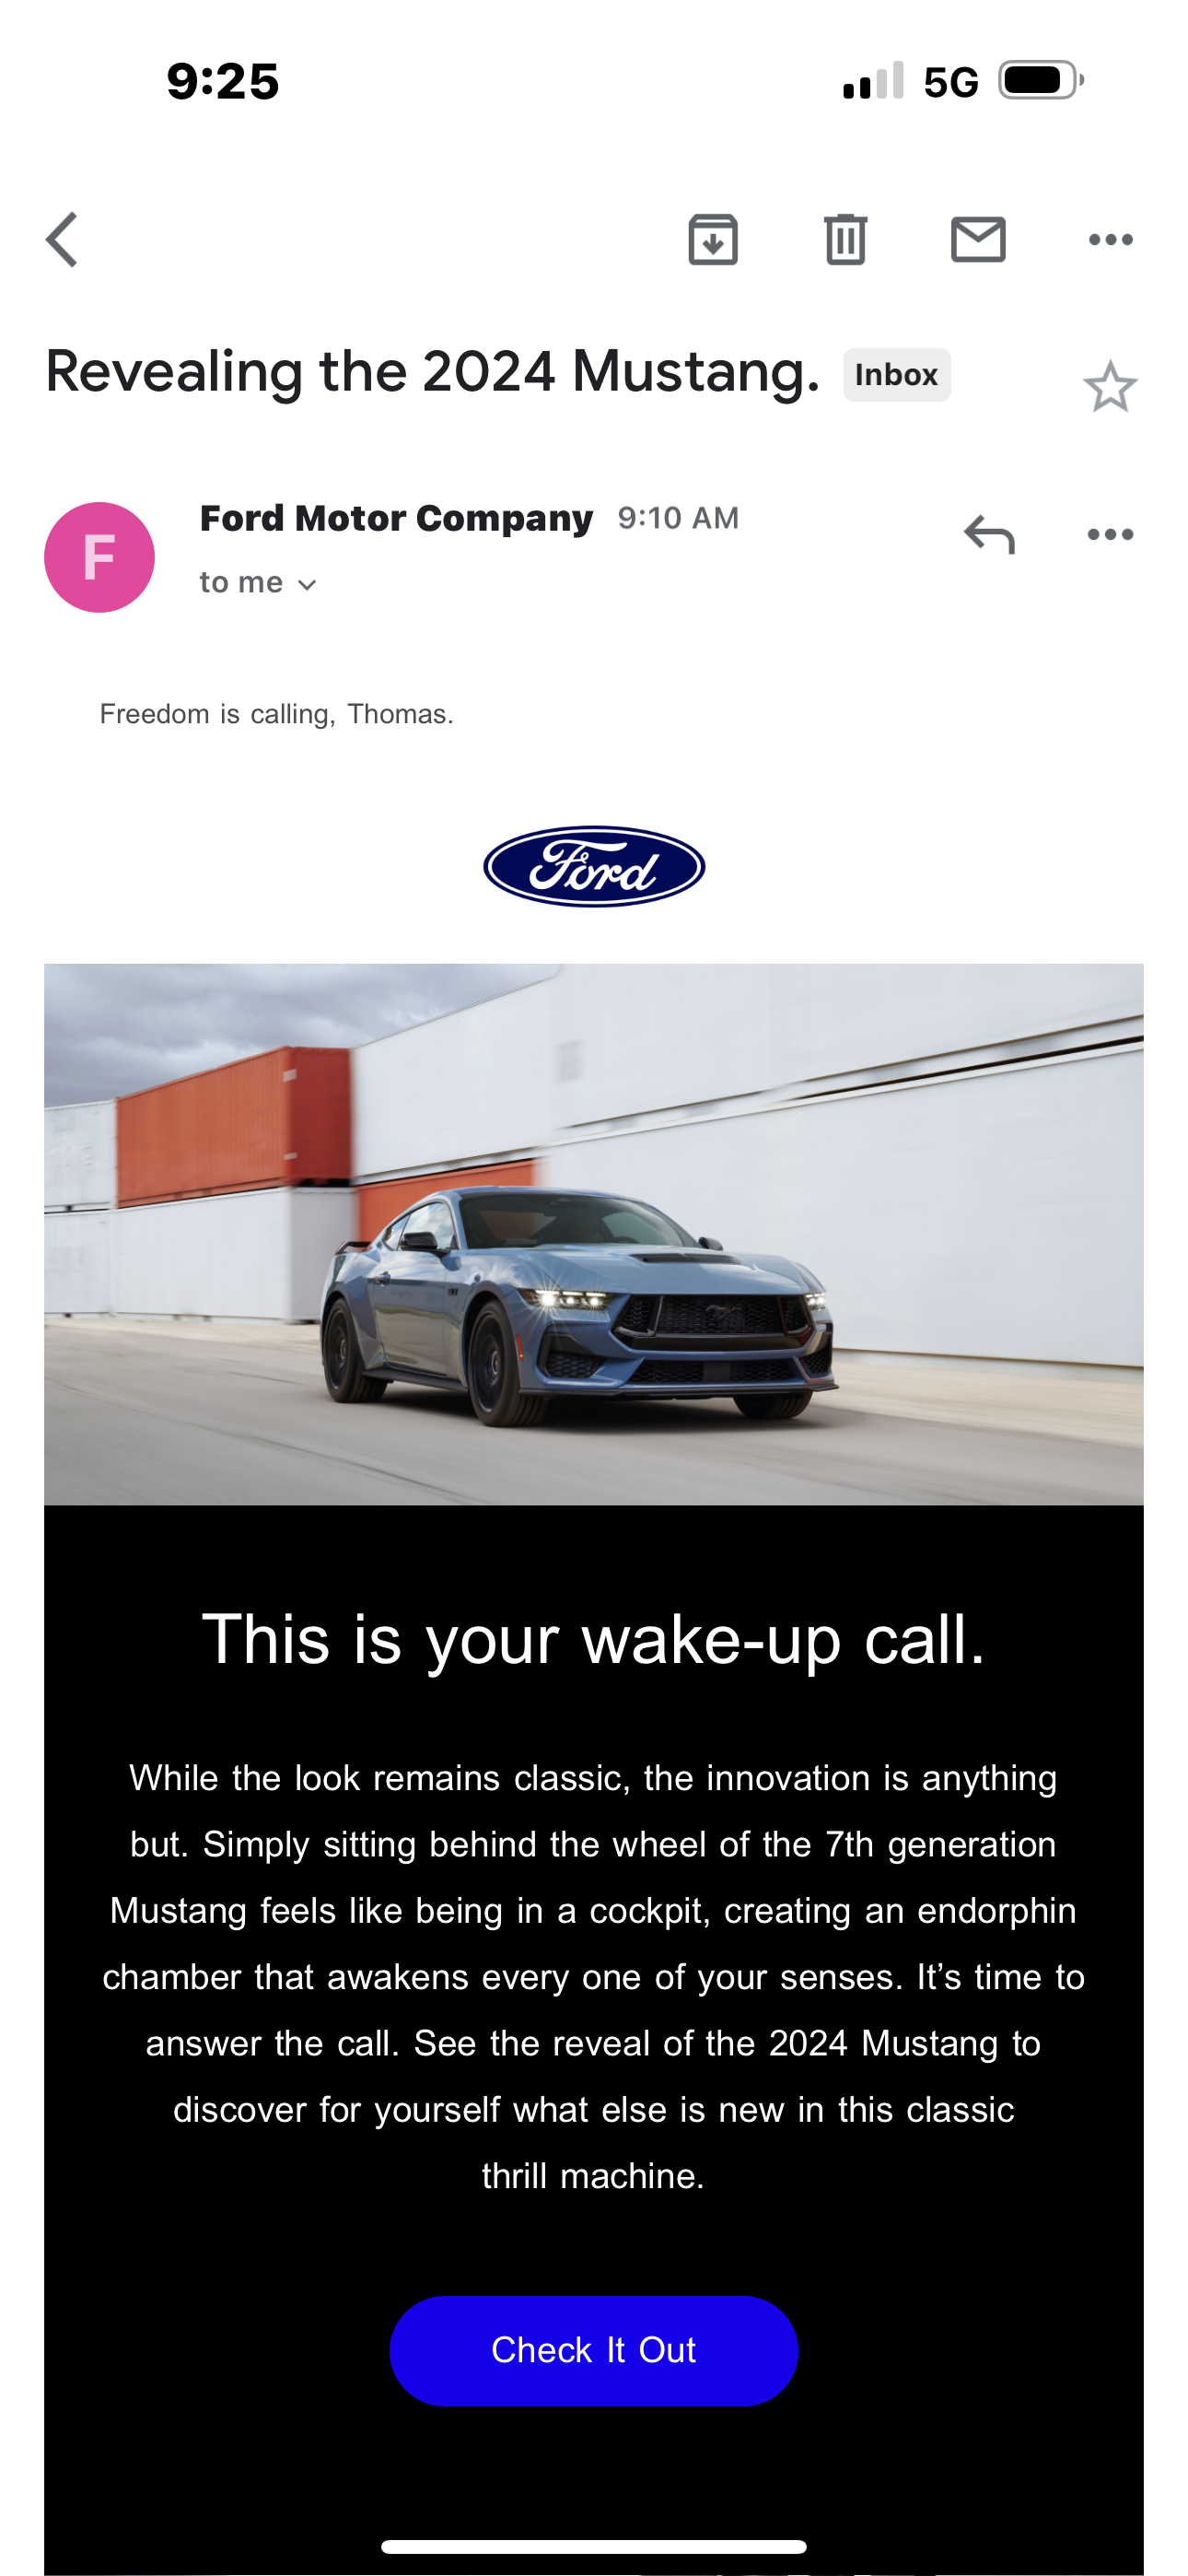 S650 Mustang "This Is Your Wake-up Call" Email Received This Morning DF18C4DA-E1C6-46C5-907B-87B257E73661